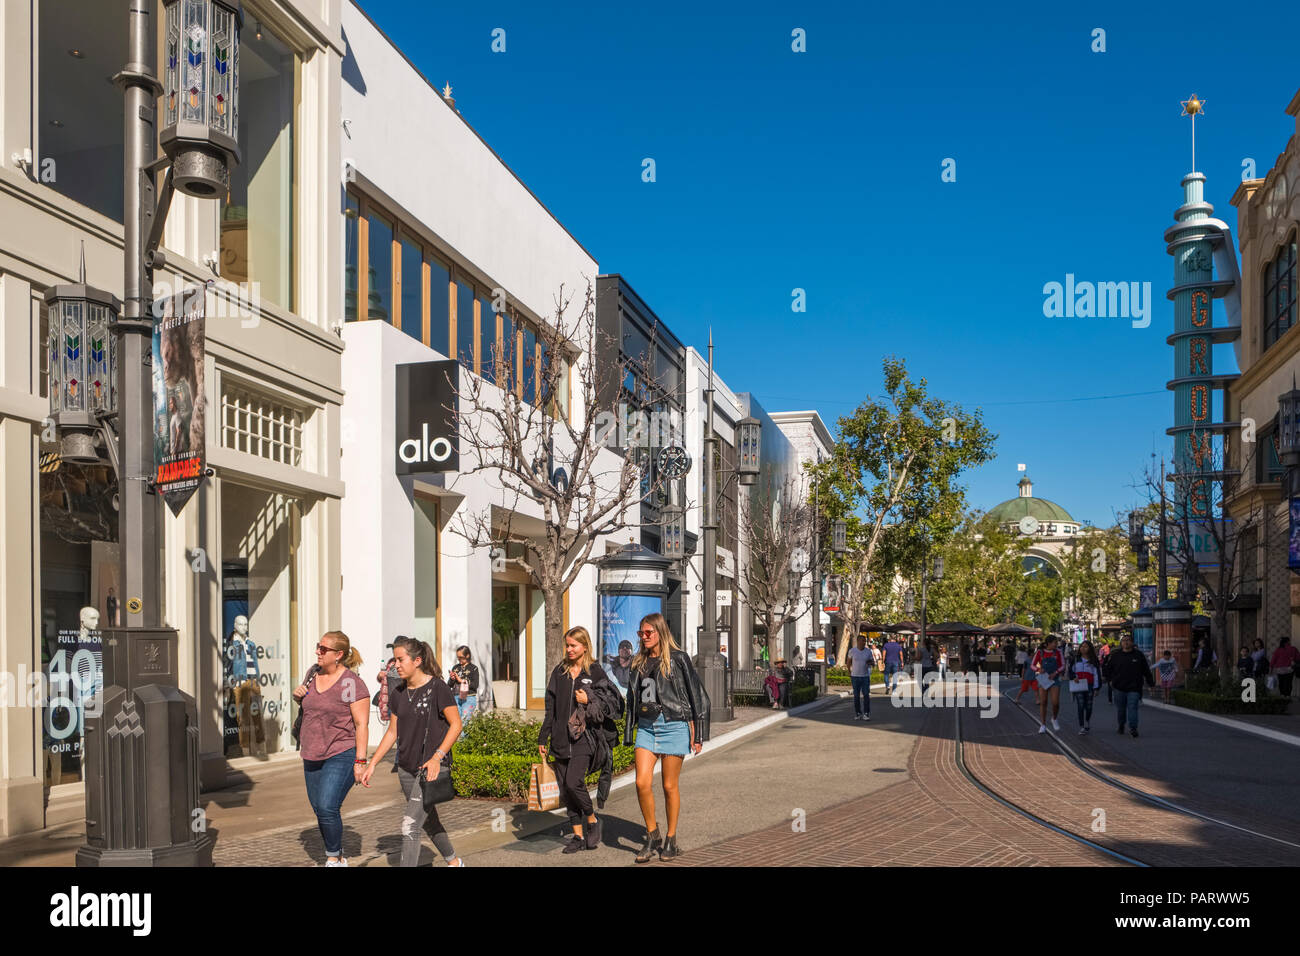 Shops and stores at the upmarket shopping mall, The Grove at the Farmers Market, Los Angeles, California, USA Stock Photo